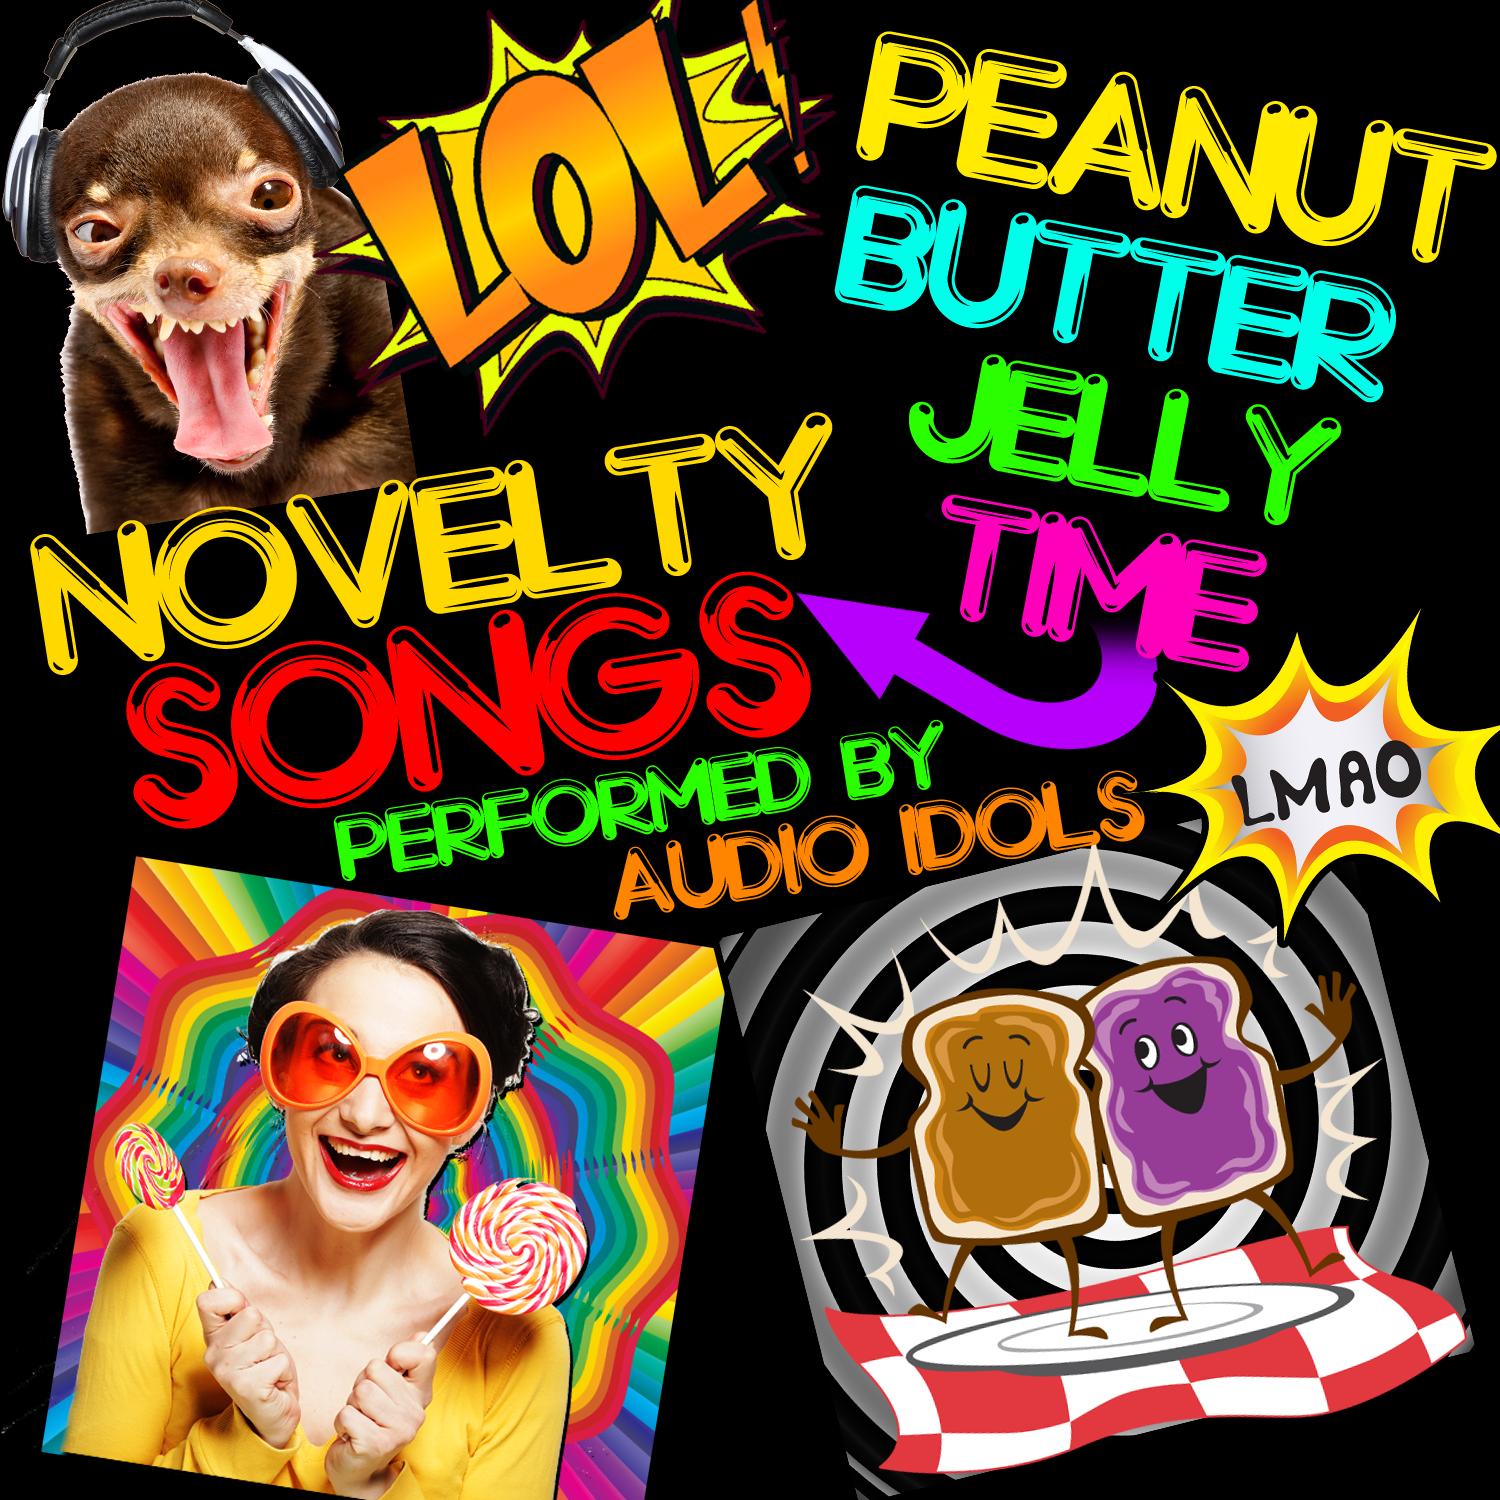 Peanut Butter Jelly Time: Novelty Songs